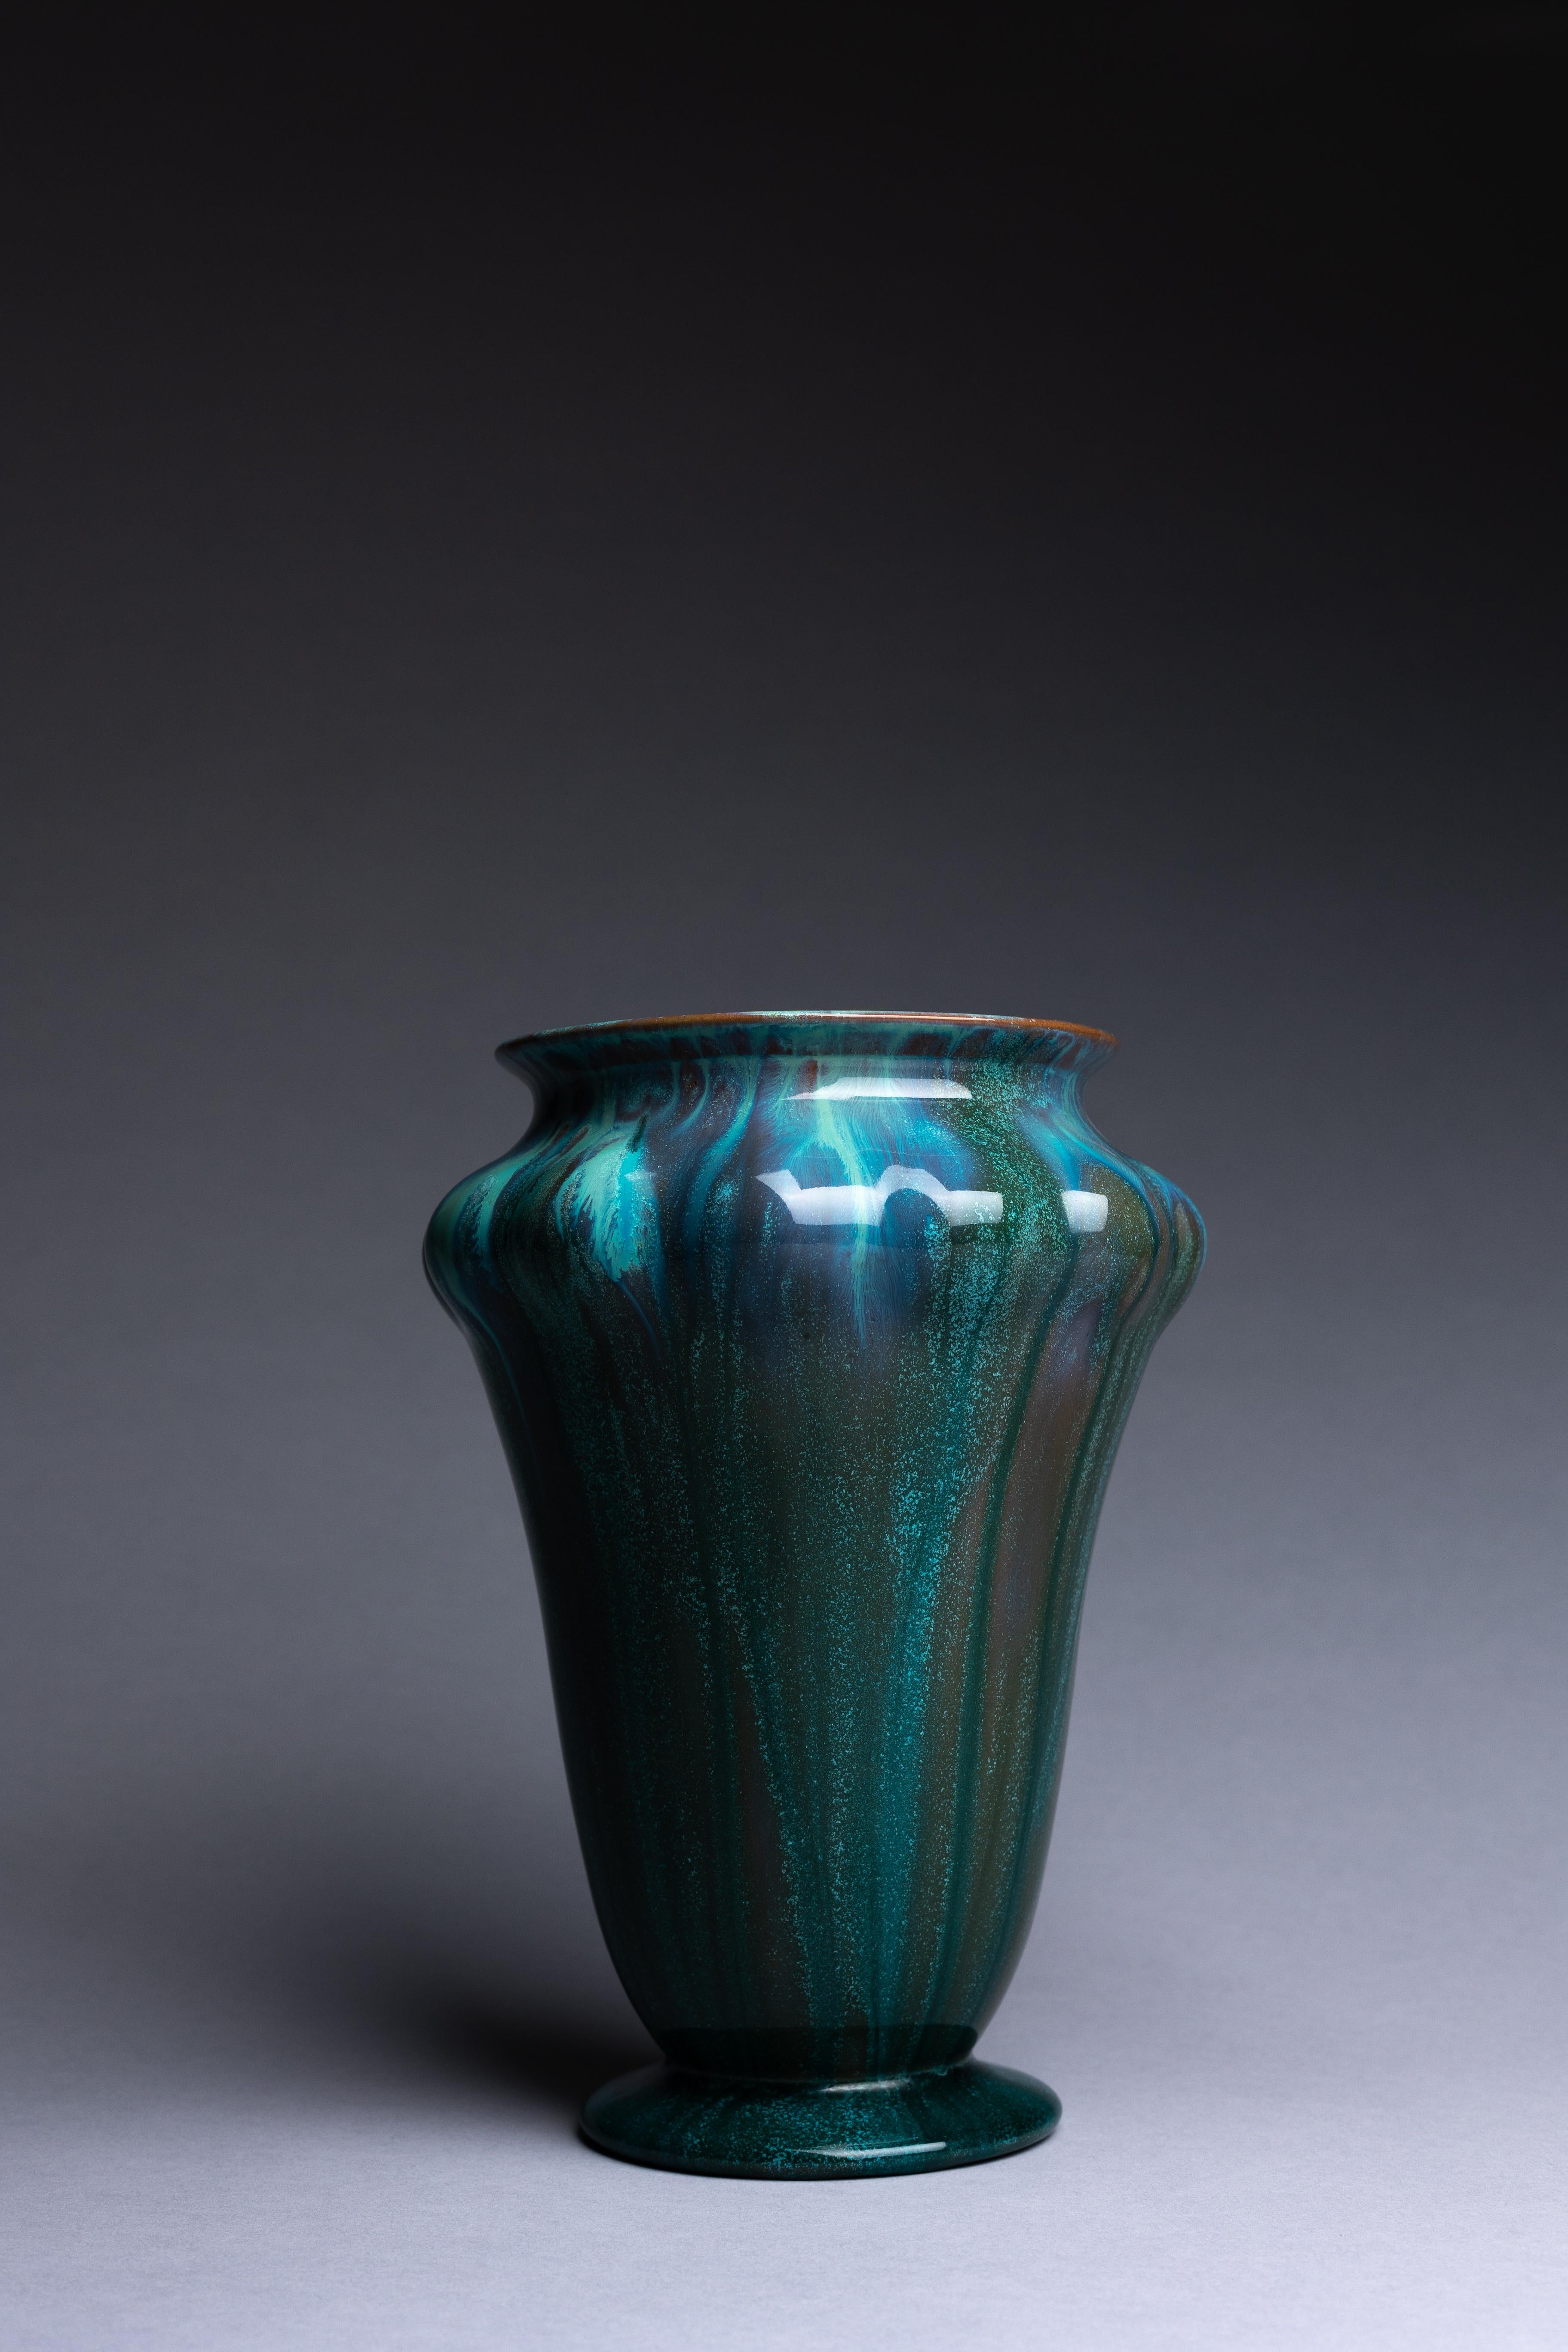 A Pilkingtons pottery vase with a gorgeous blue crystalline glaze, created in 1913. This vase is a fine example of Pilkington’s studio art pottery.

The stunning effects of Pilkington’s crystalline glaze are on full display in this large vase. The